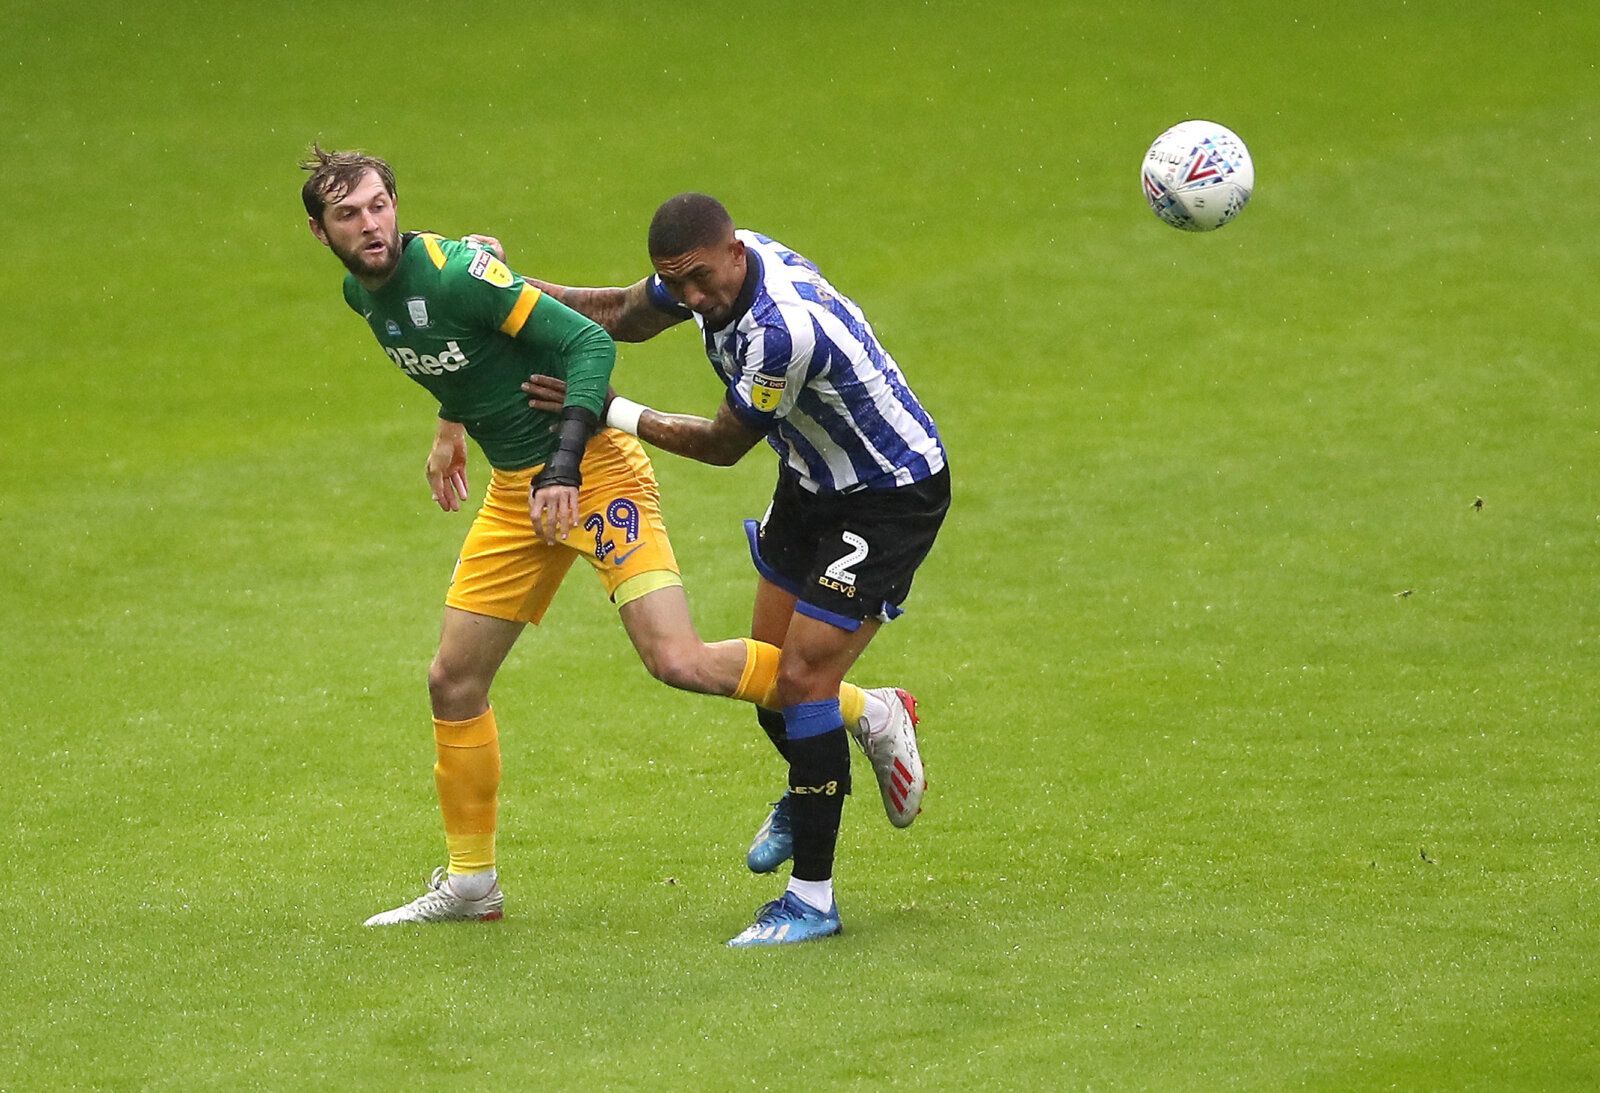 Soccer Football - Championship - Sheffield Wednesday v Preston North End - Hillsborough, Sheffield, Britain - July 8, 2020   Sheffield Wednesday's Liam Palmer in action with Preston North End's Tom Barkhuizen, as play resumes behind closed doors following the outbreak of the coronavirus disease (COVID-19)   Action Images/Molly Darlington    EDITORIAL USE ONLY. No use with unauthorized audio, video, data, fixture lists, club/league logos or 